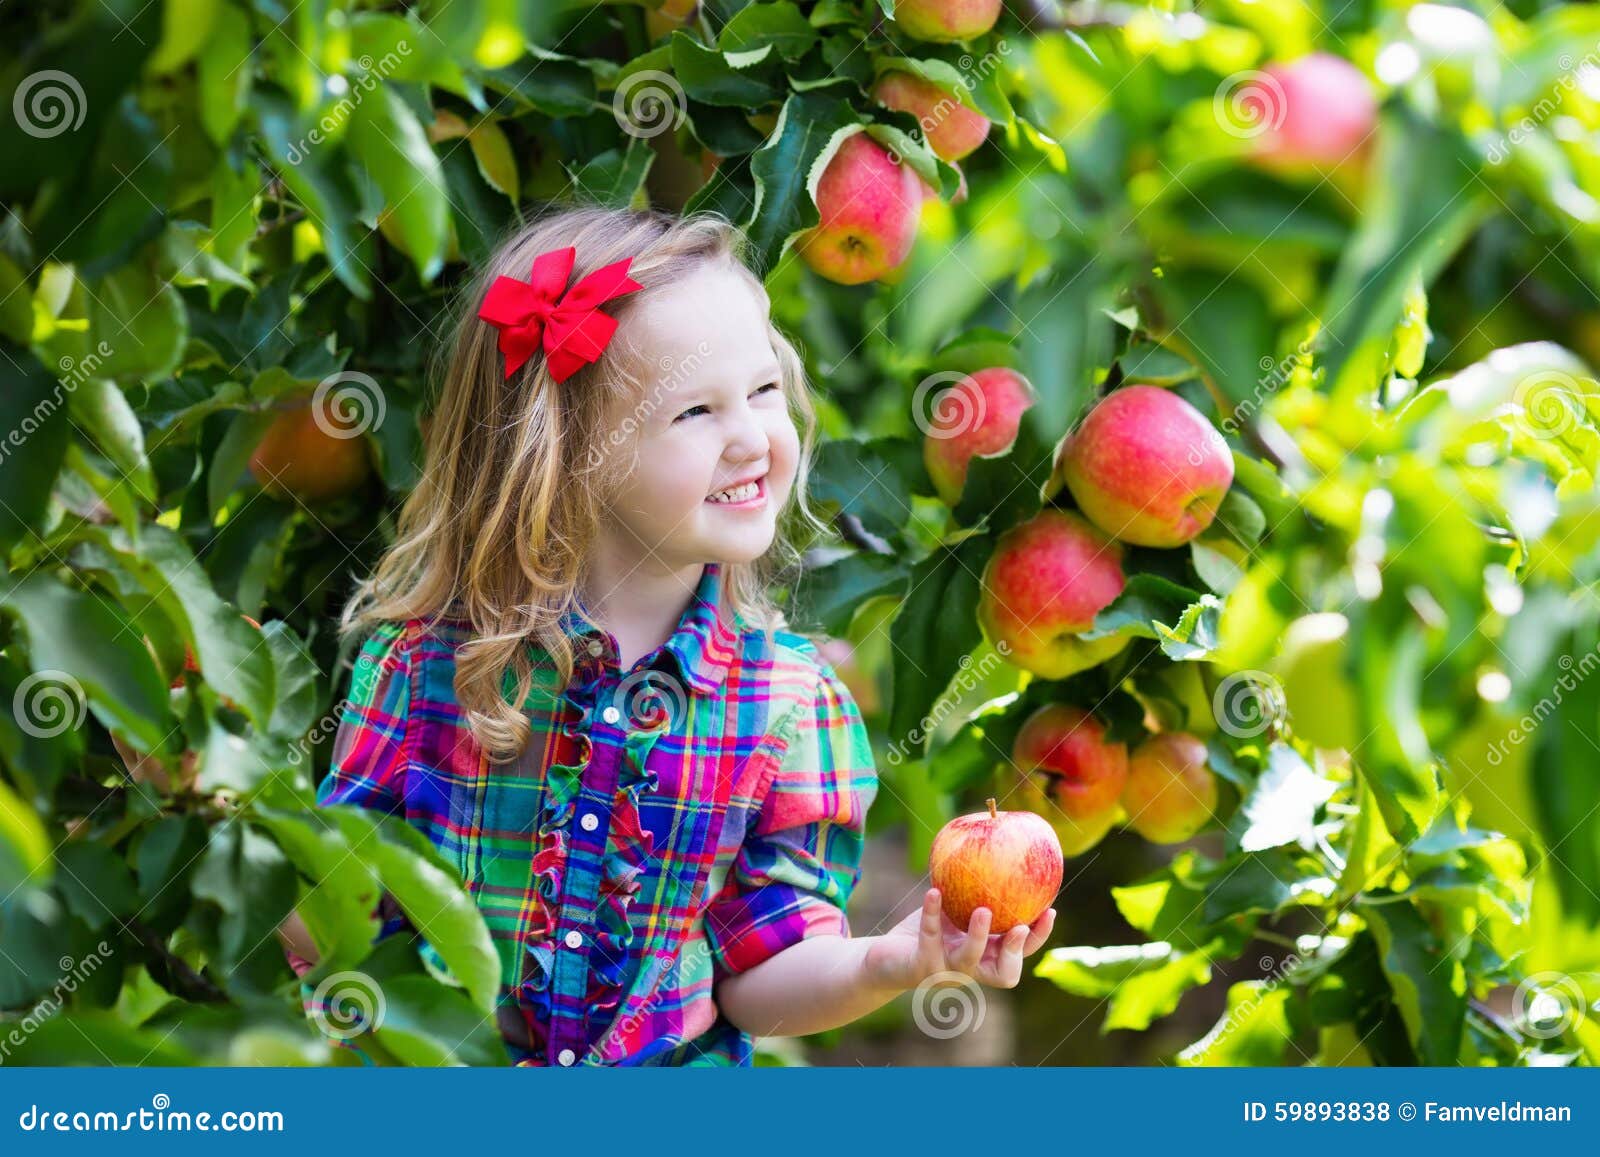 little girl picking apples from tree in a fruit orchard